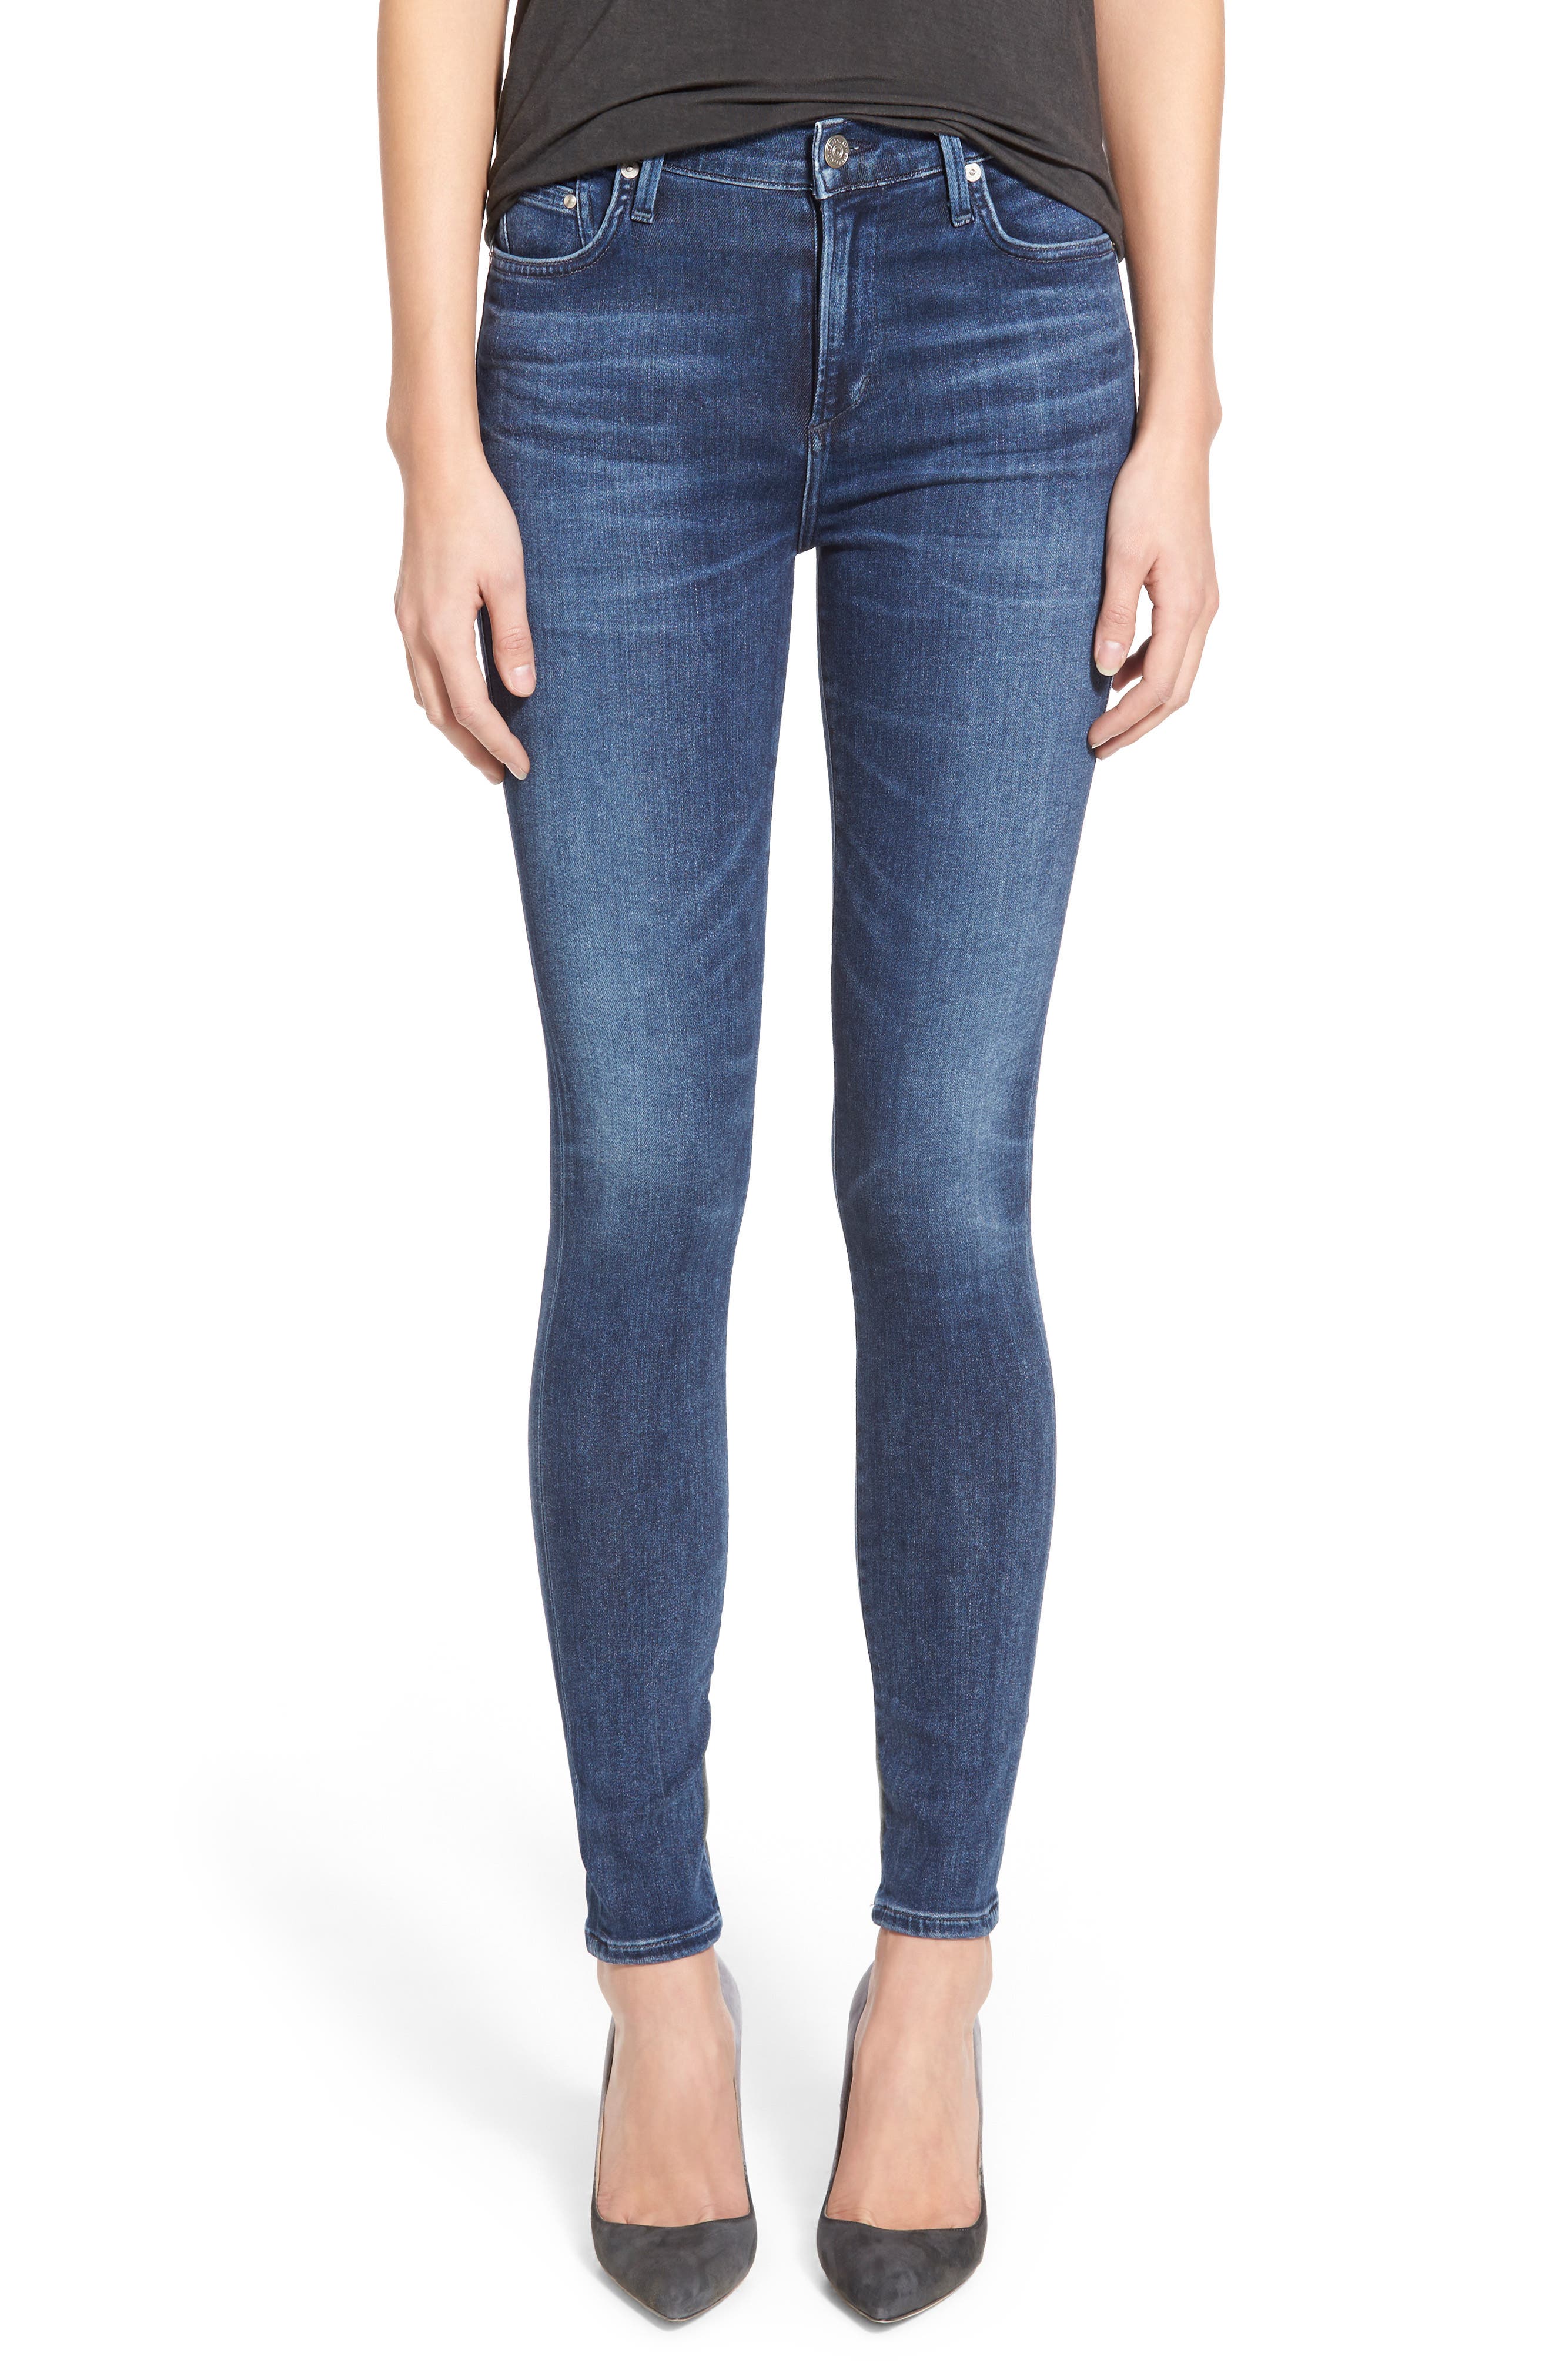 citizens of humanity rocket high rise jeans